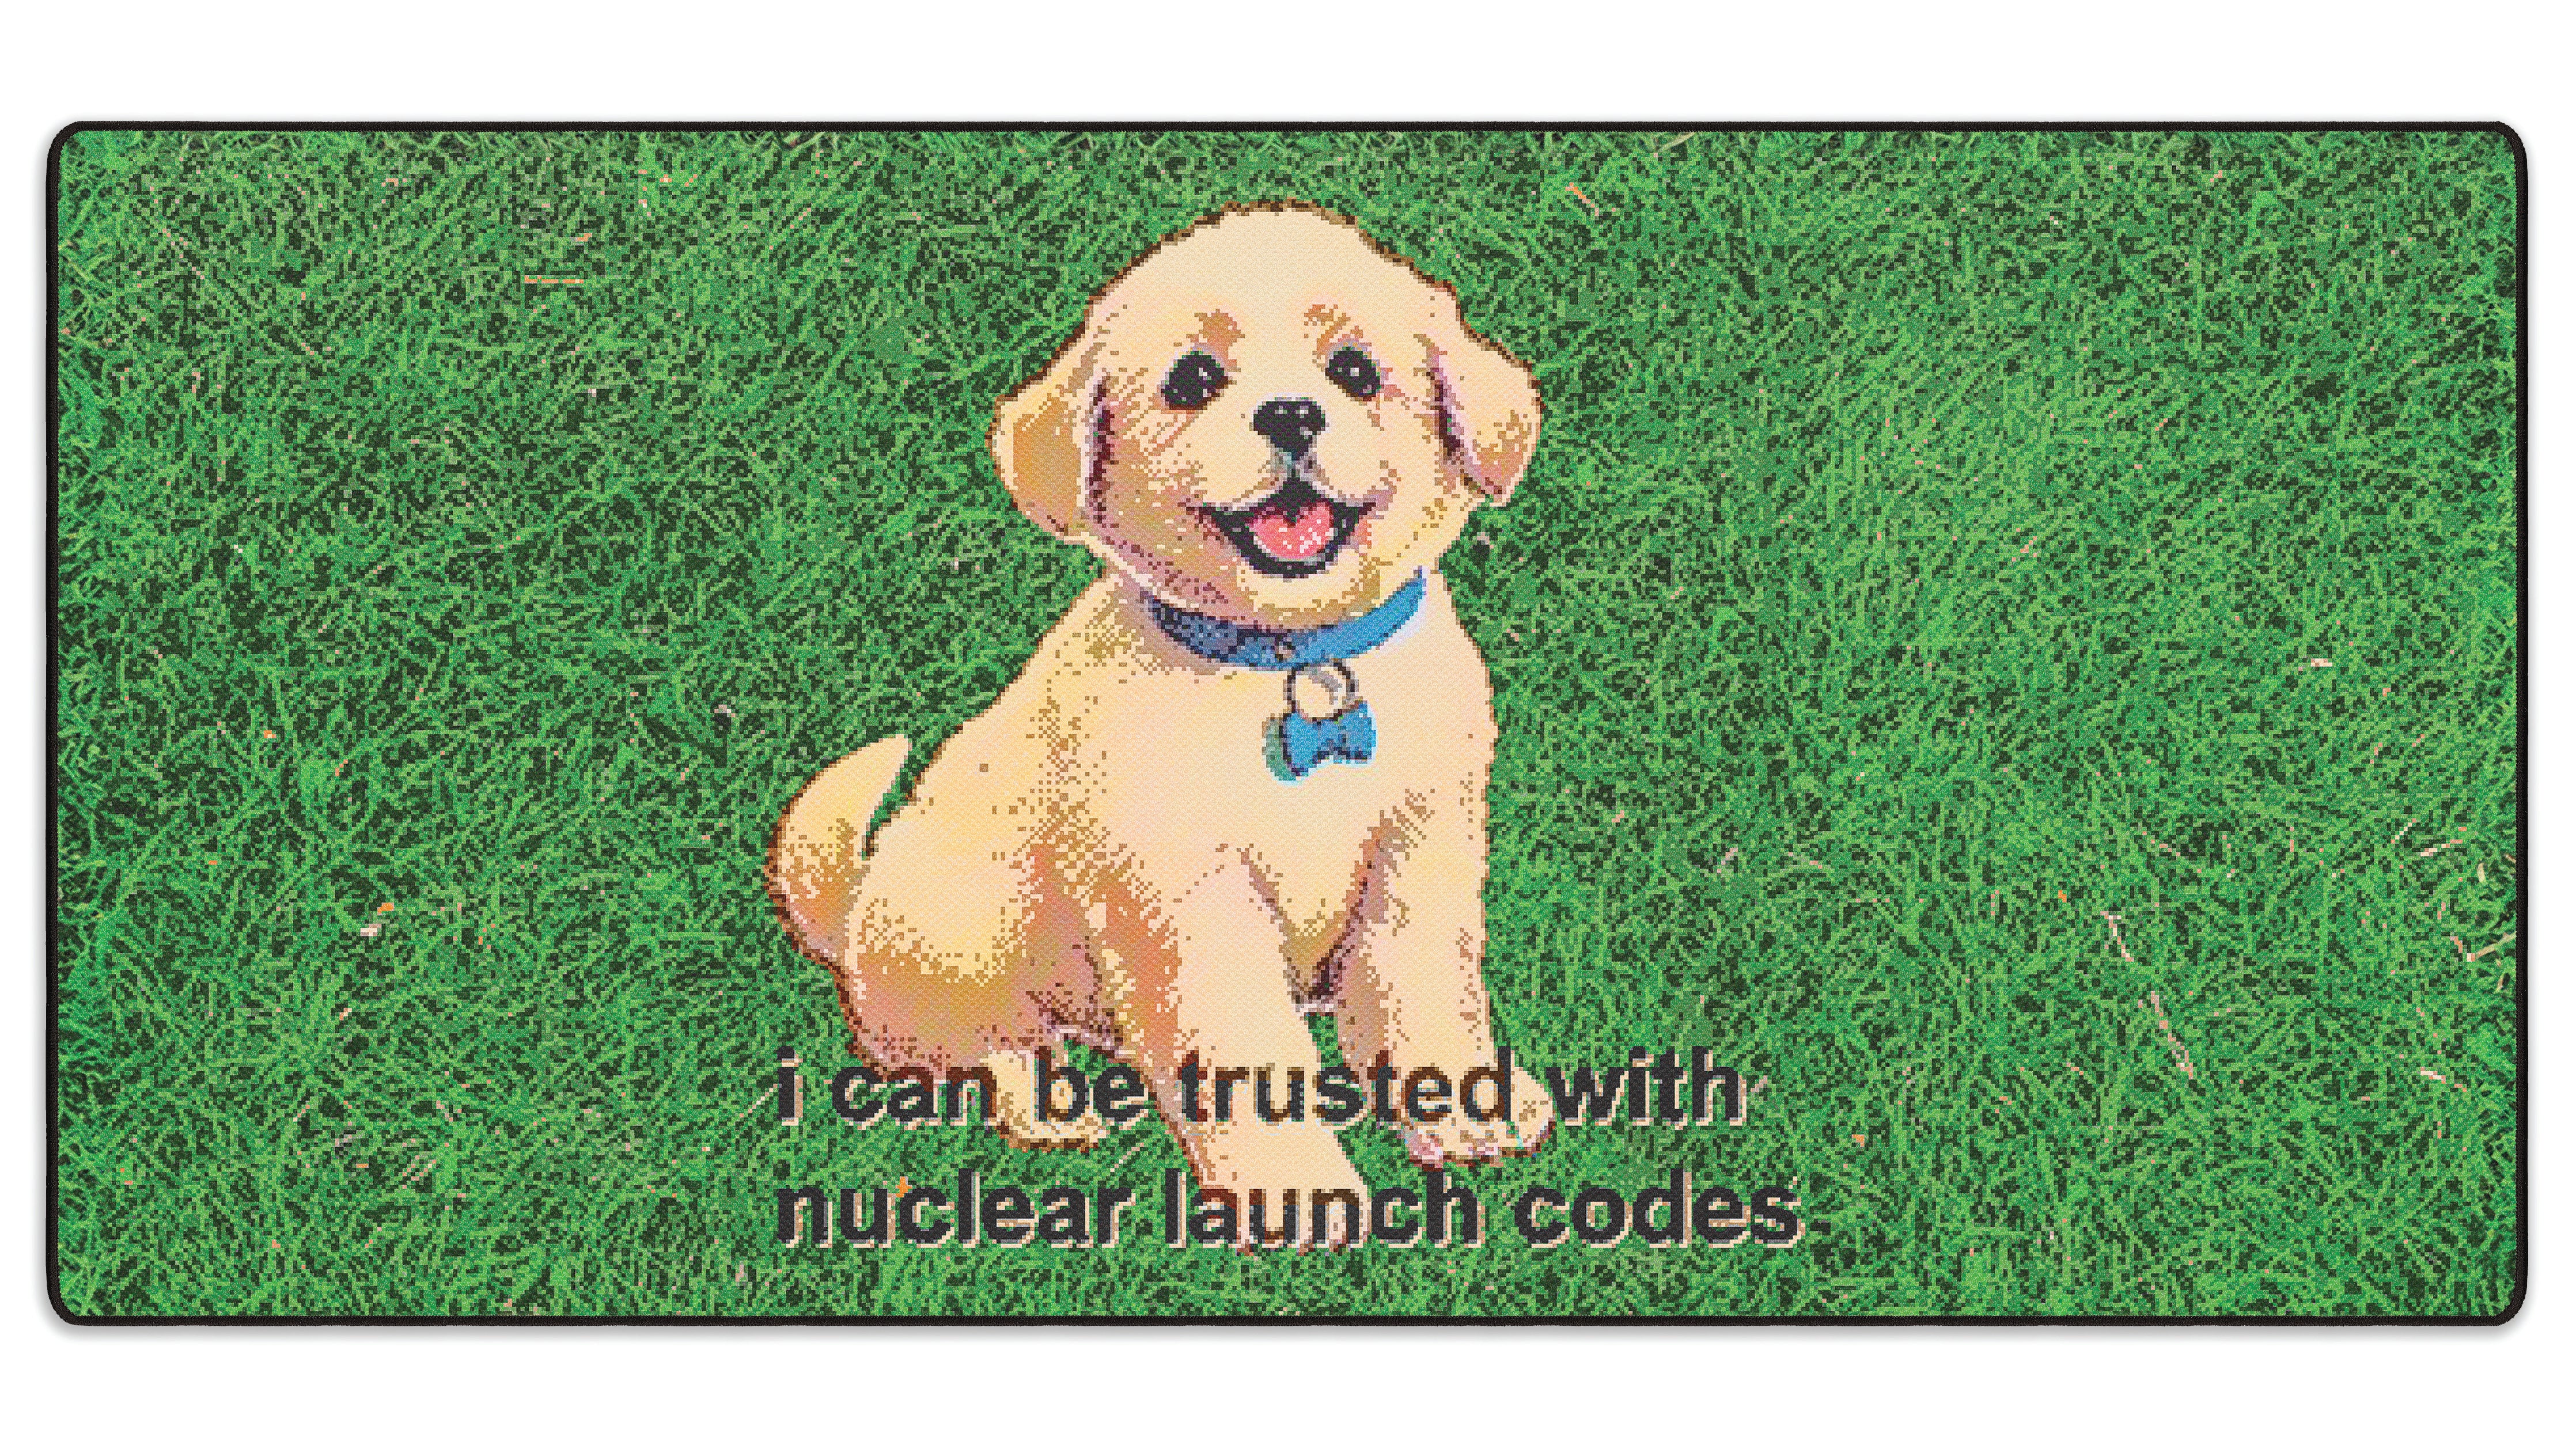 Trust Me, by Dogecore - The Mousepad Company